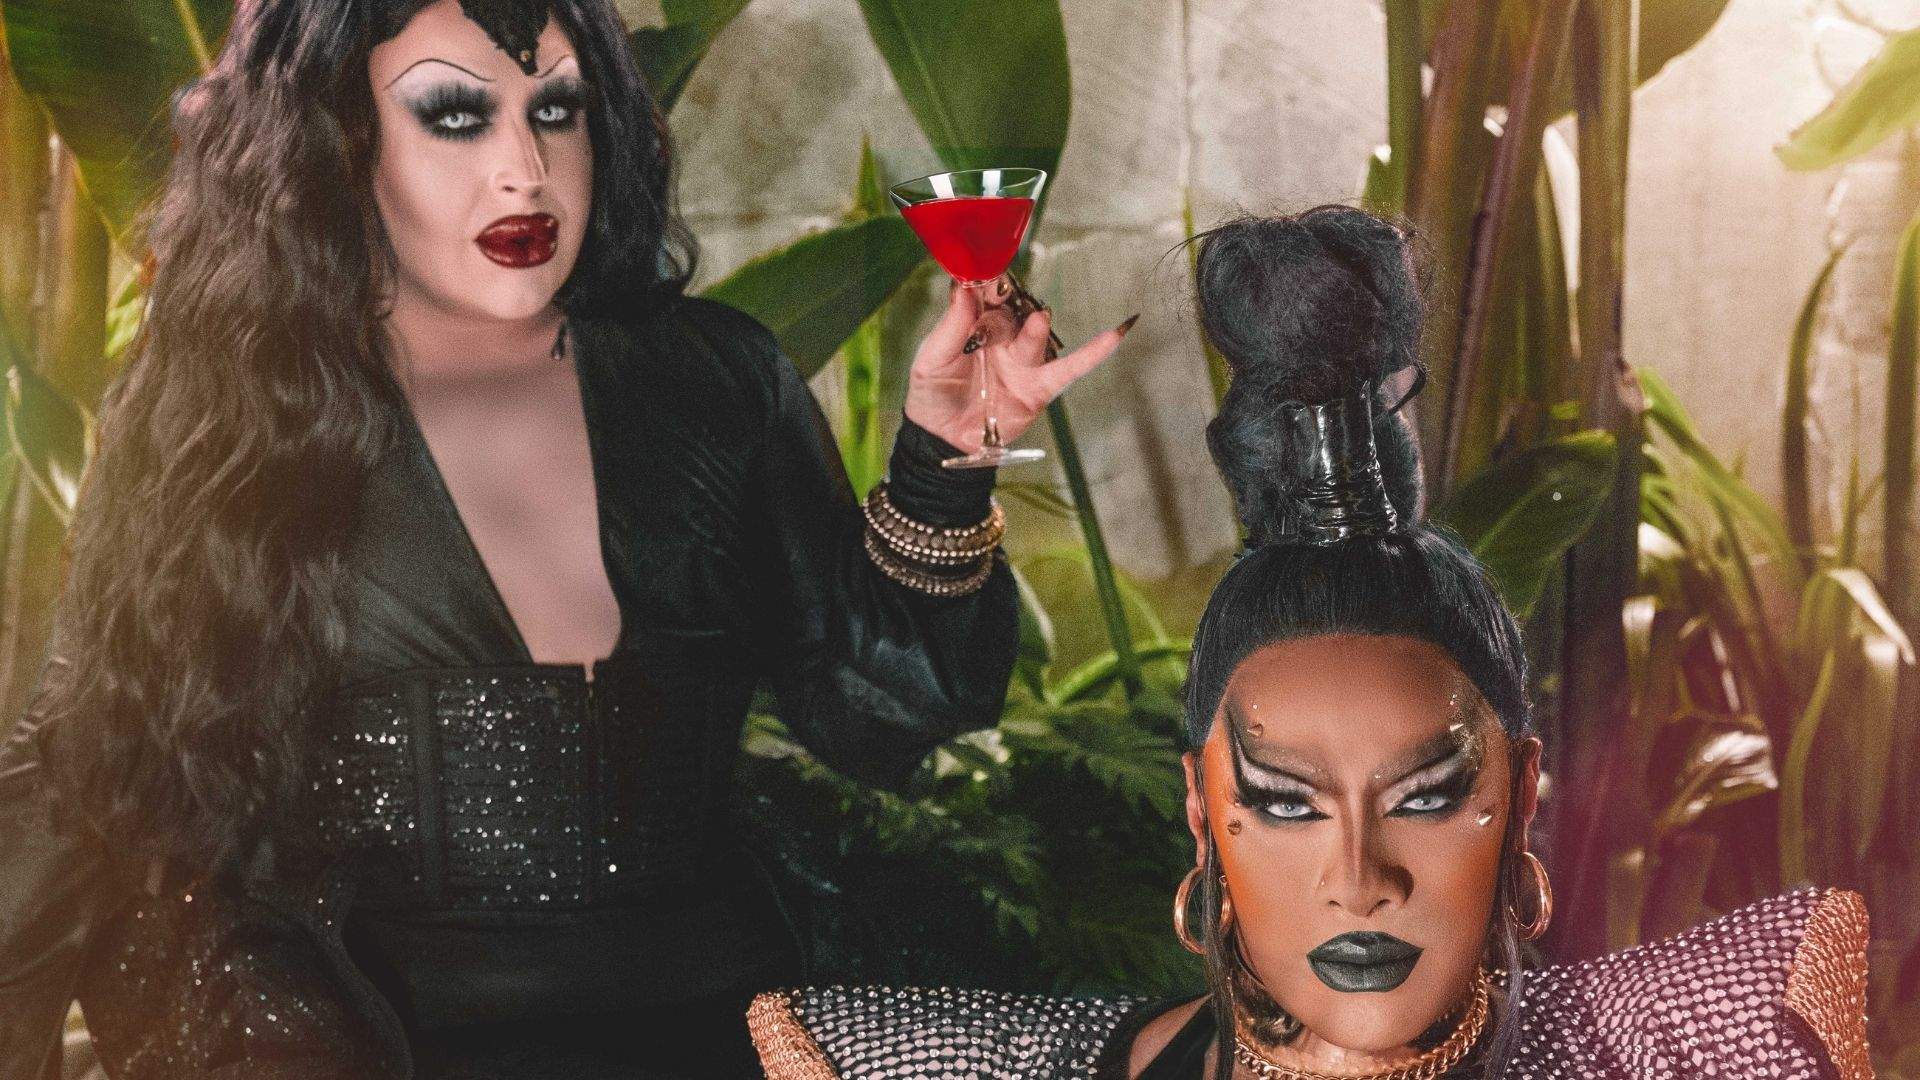 Drag queens in spooky attire for Halloween celebrations.